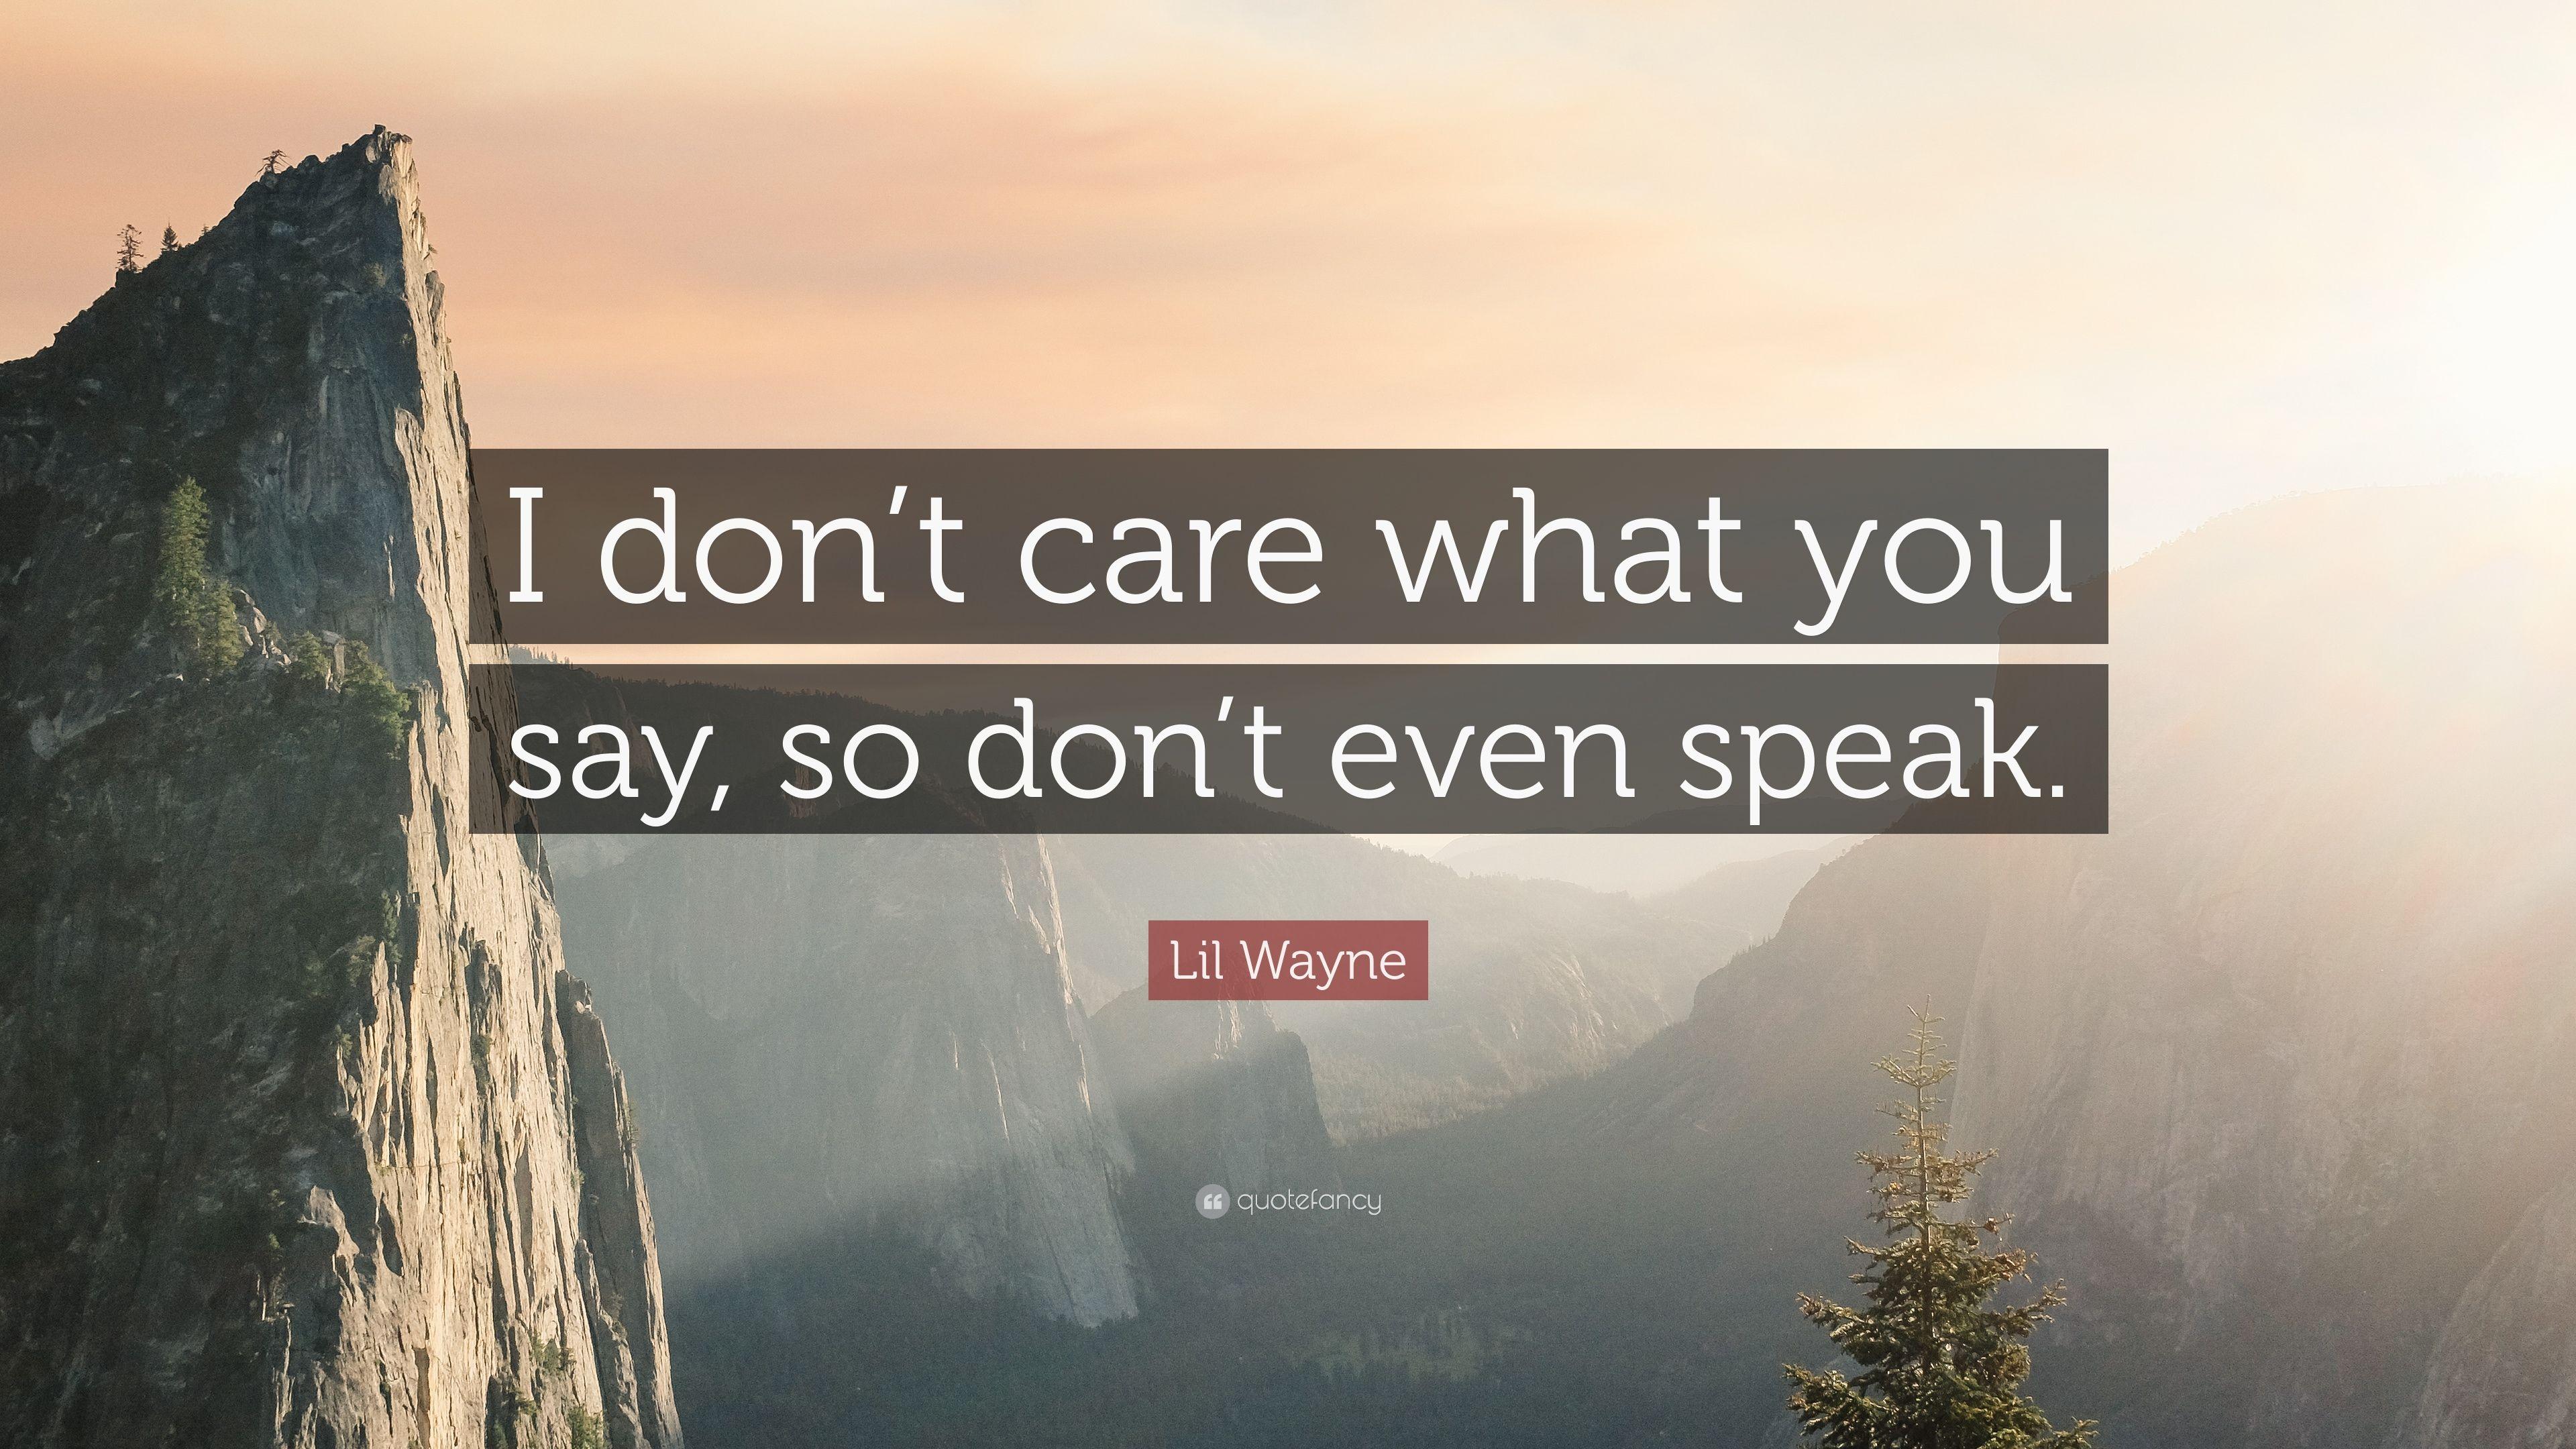 Lil Wayne Quote: “I don't care what you say, so don't even speak